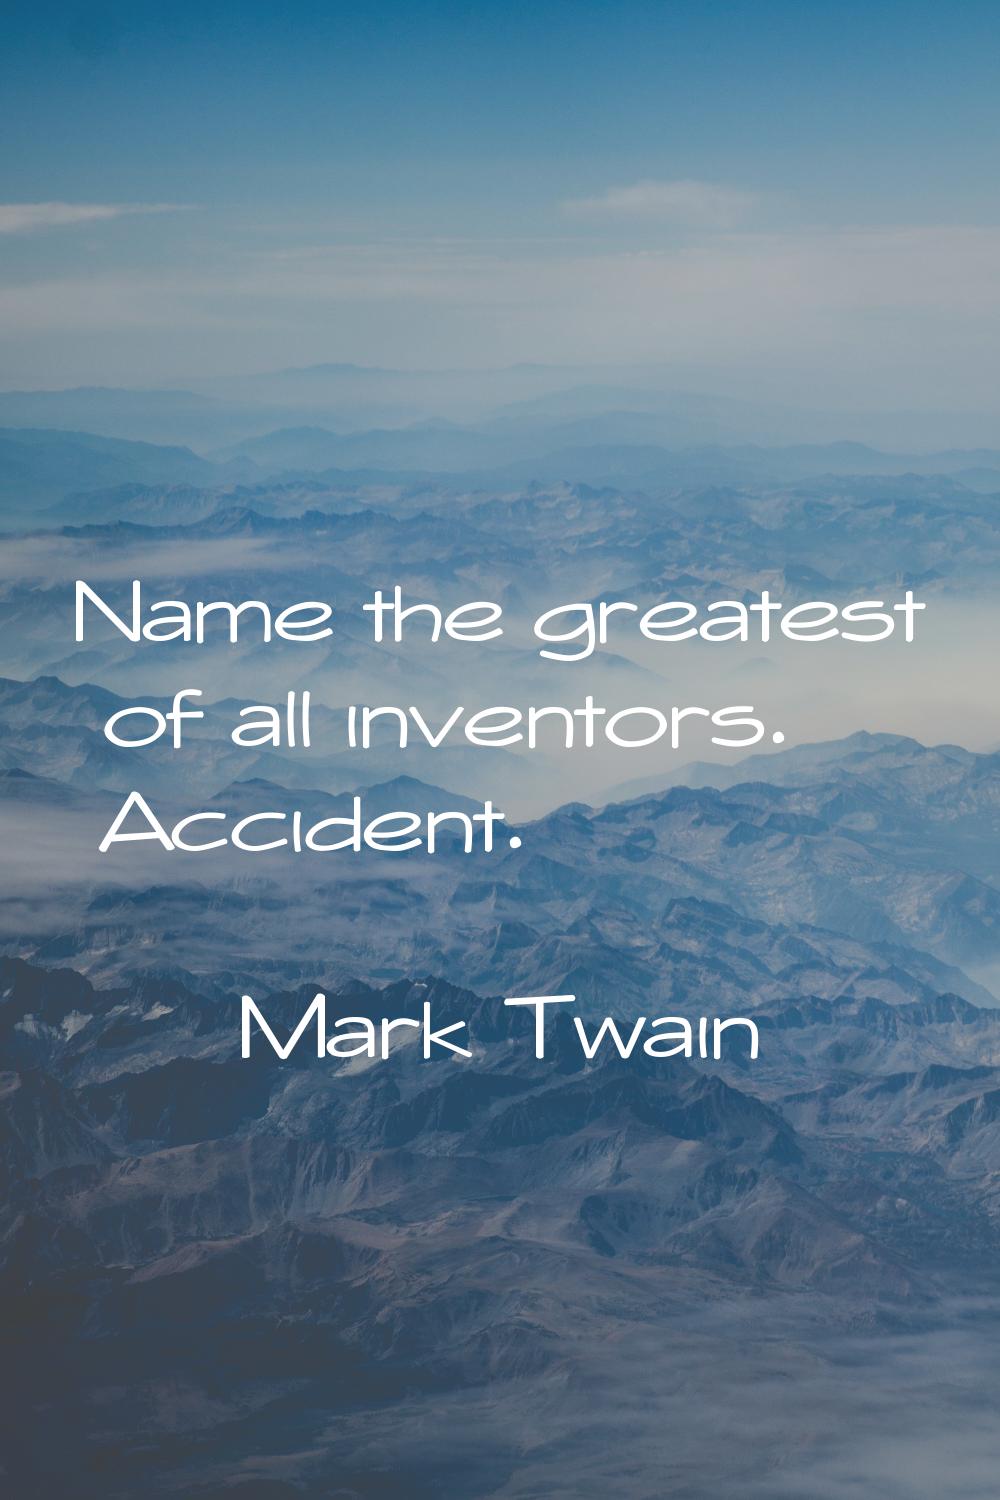 Name the greatest of all inventors. Accident.